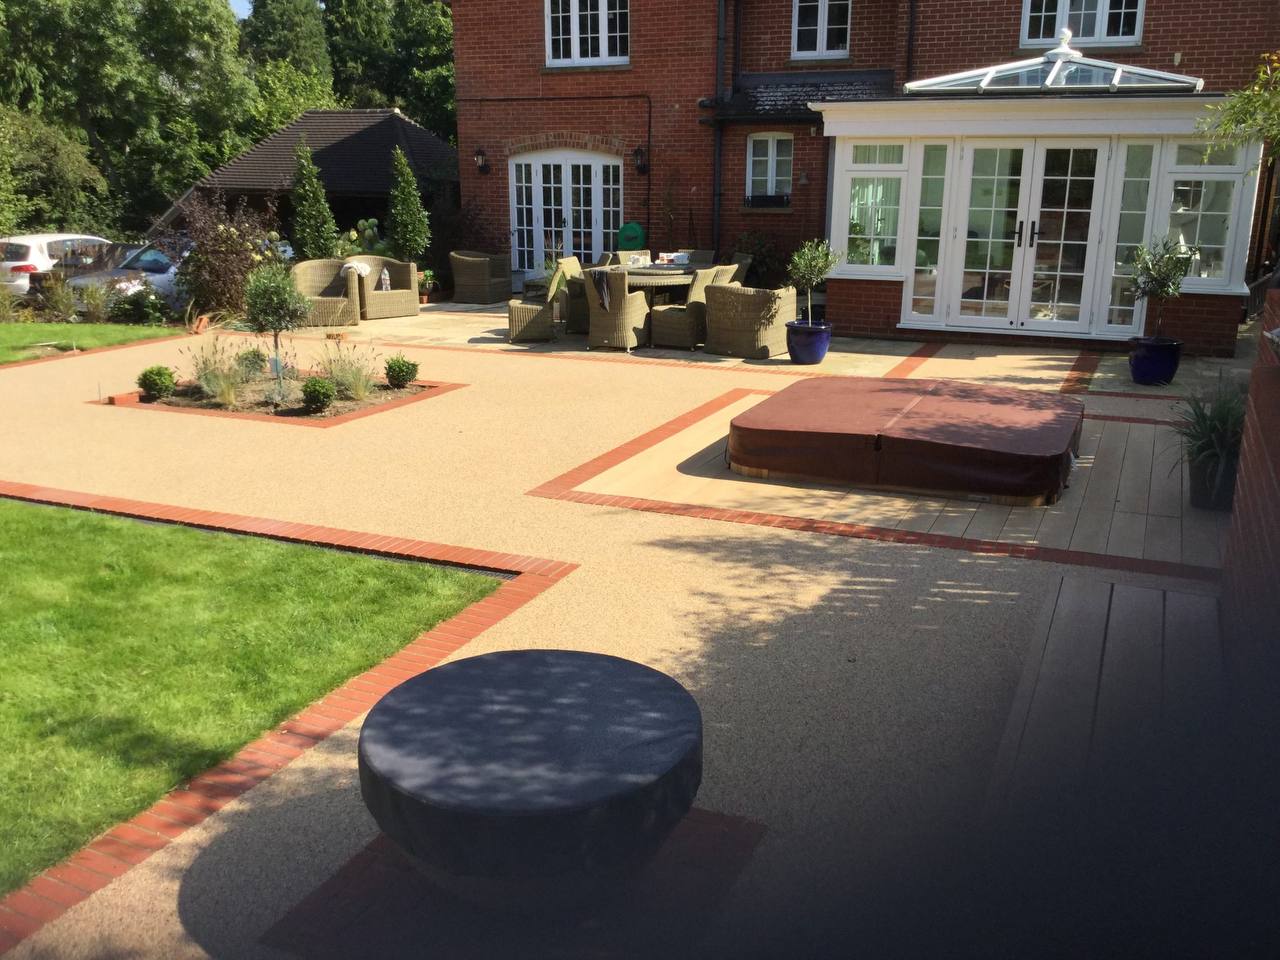 This is a photo of a Resin bound patio carried out in Southampton. All works done by Resin Driveways Southampton